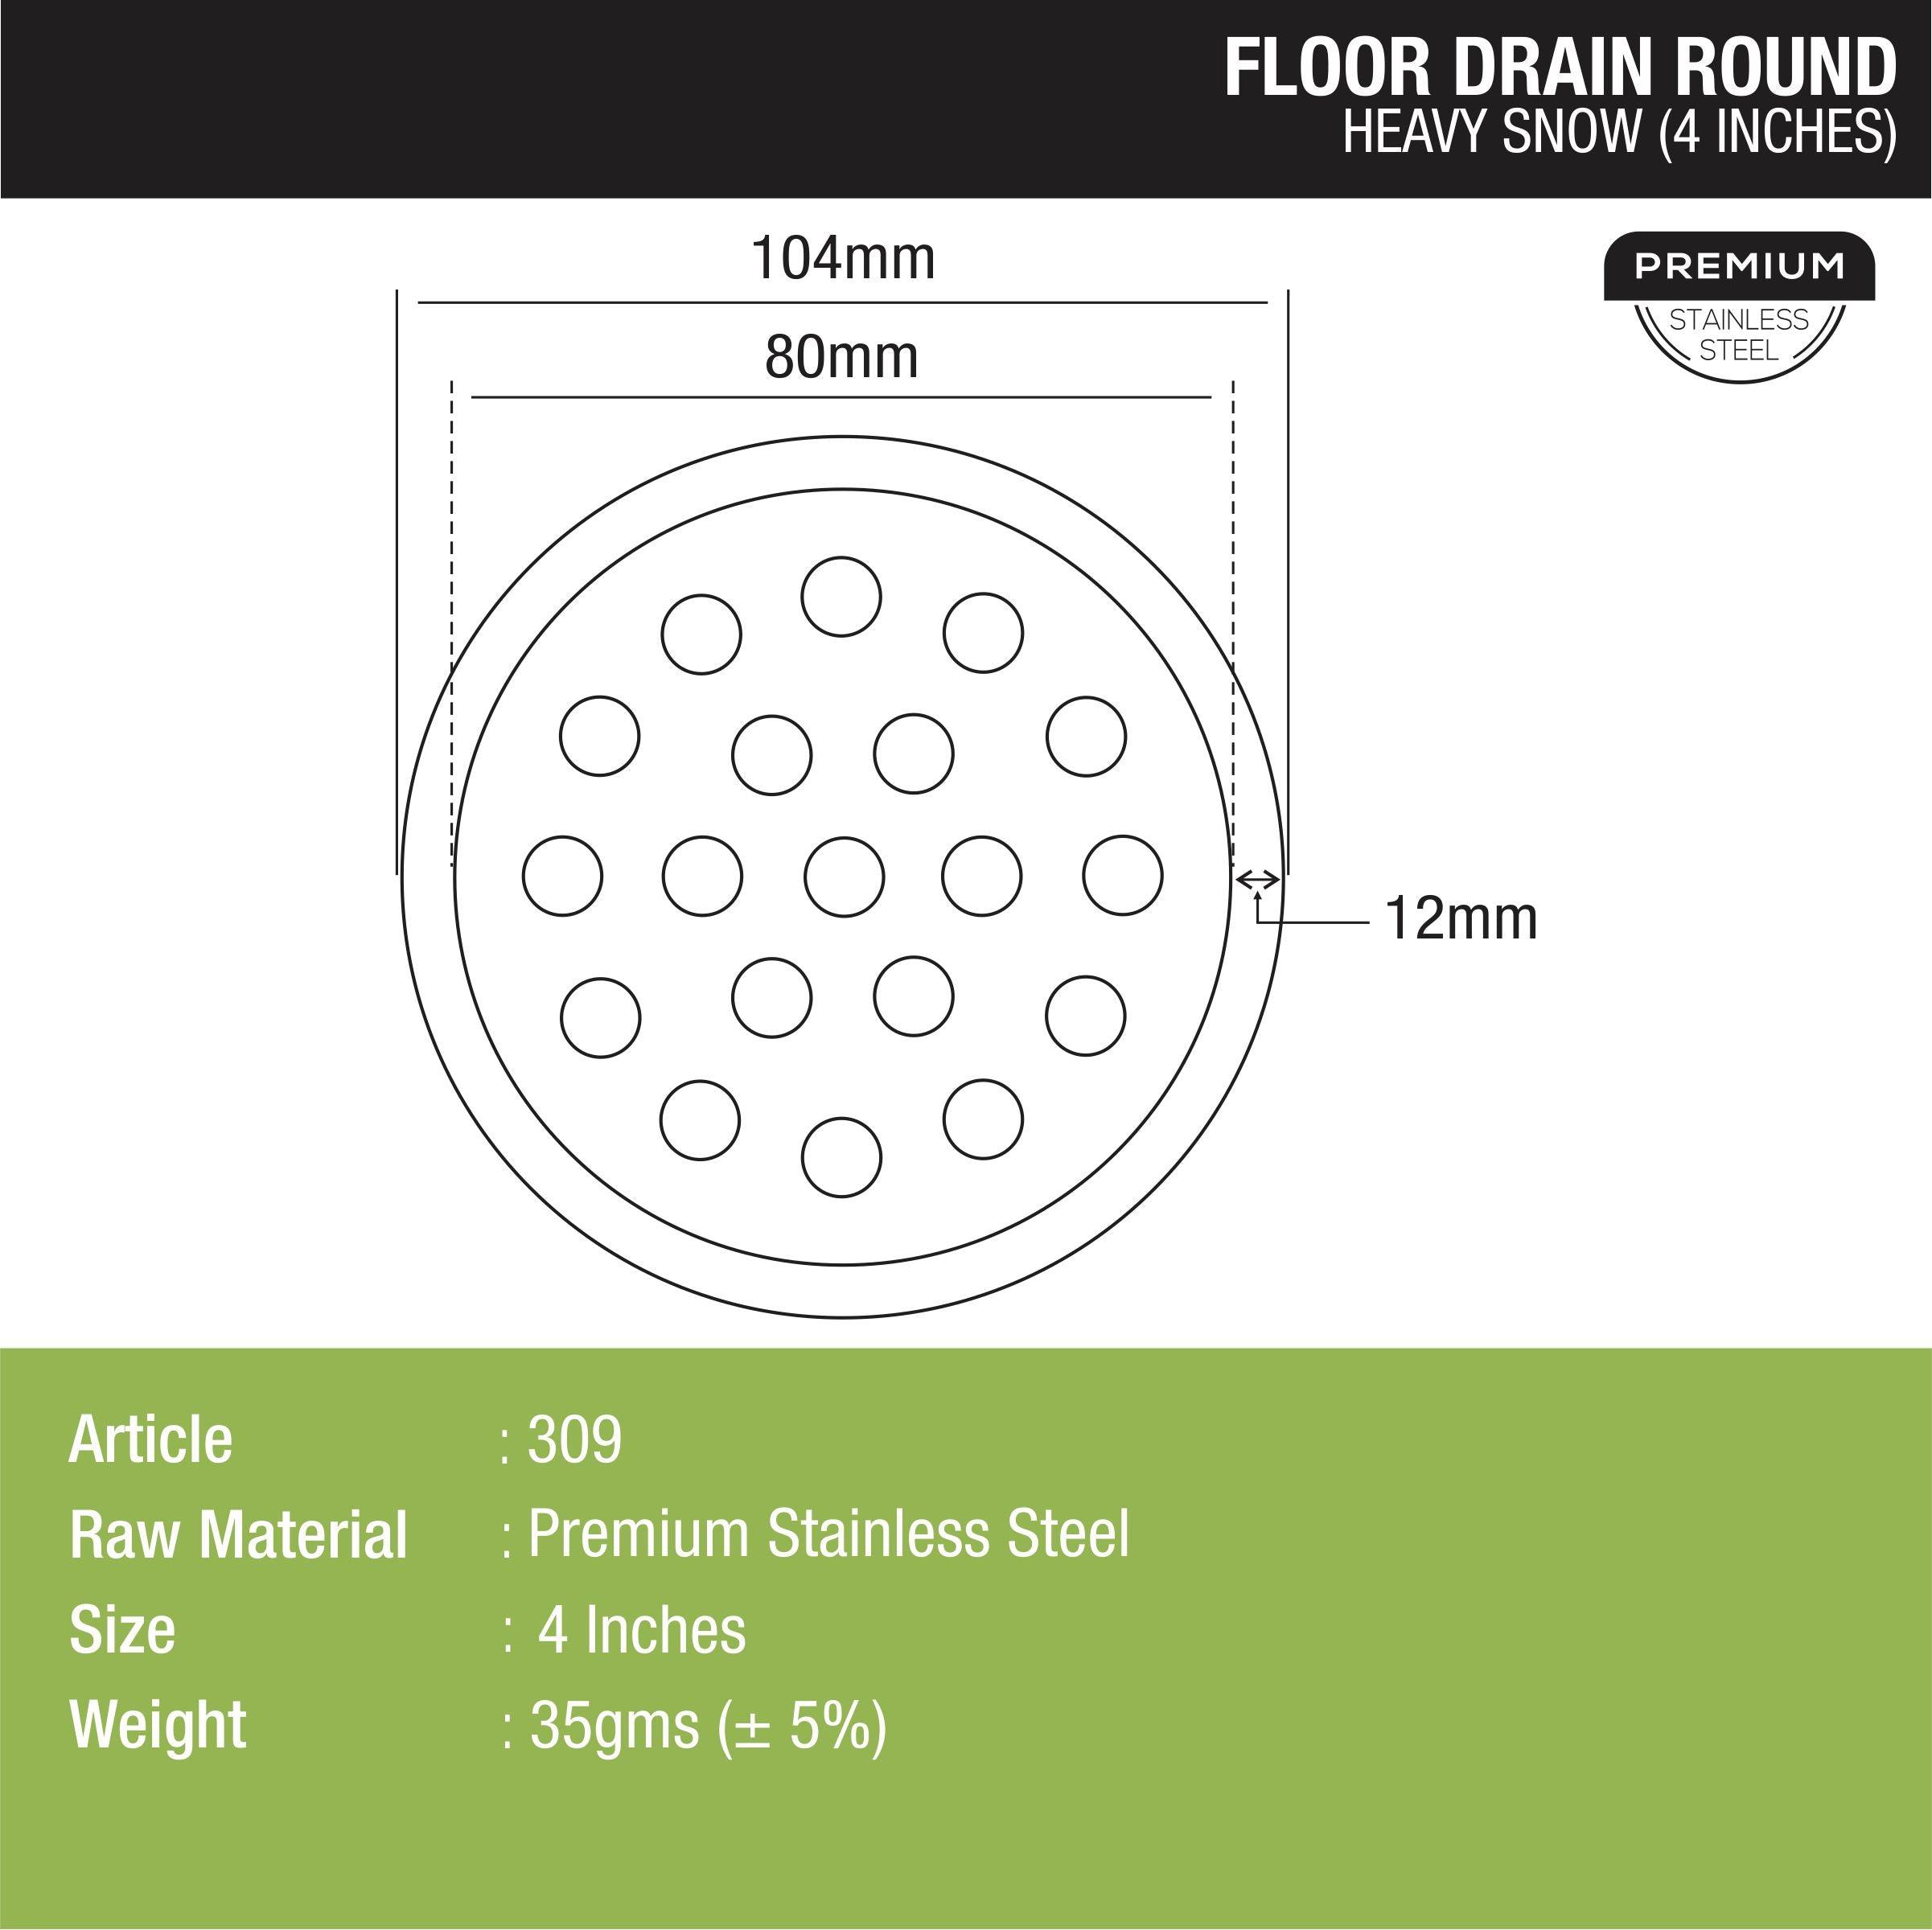 Heavy Snow Round Flat Cut Floor Drain (4 inches) dimensions and sizes